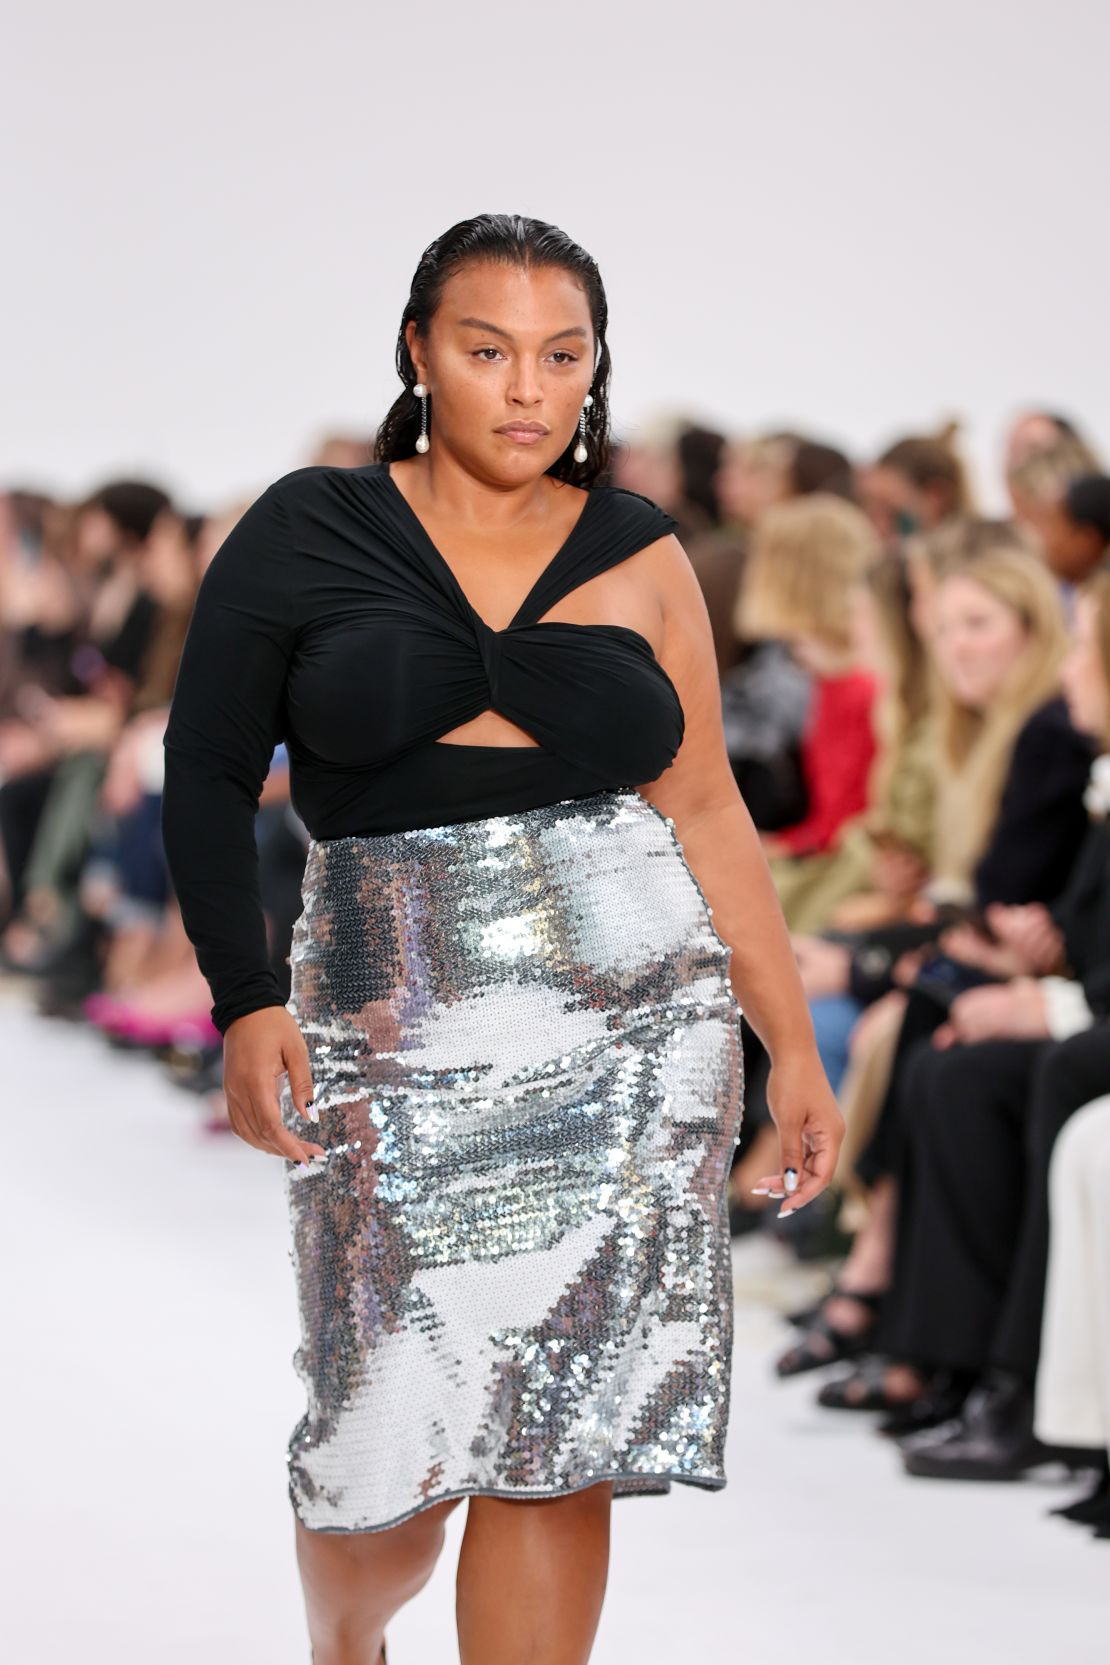 Plus-Sized Model Challenges Beauty Standards By Starring In Her